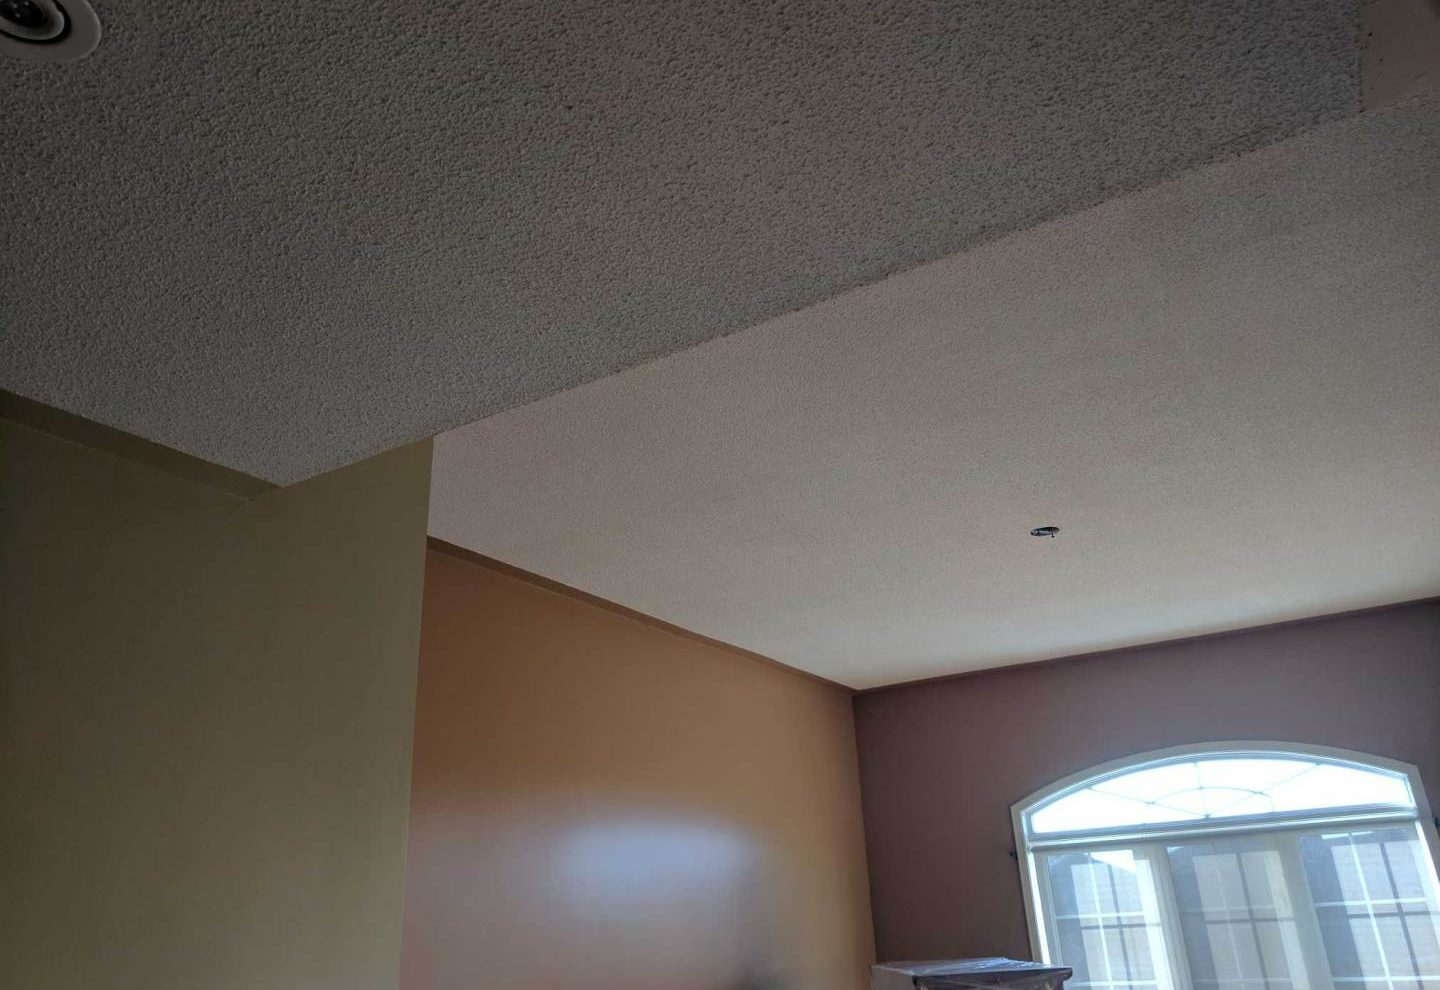 Ceiling Stucco Popcorn Ceilings What Are Stucco Ceilings